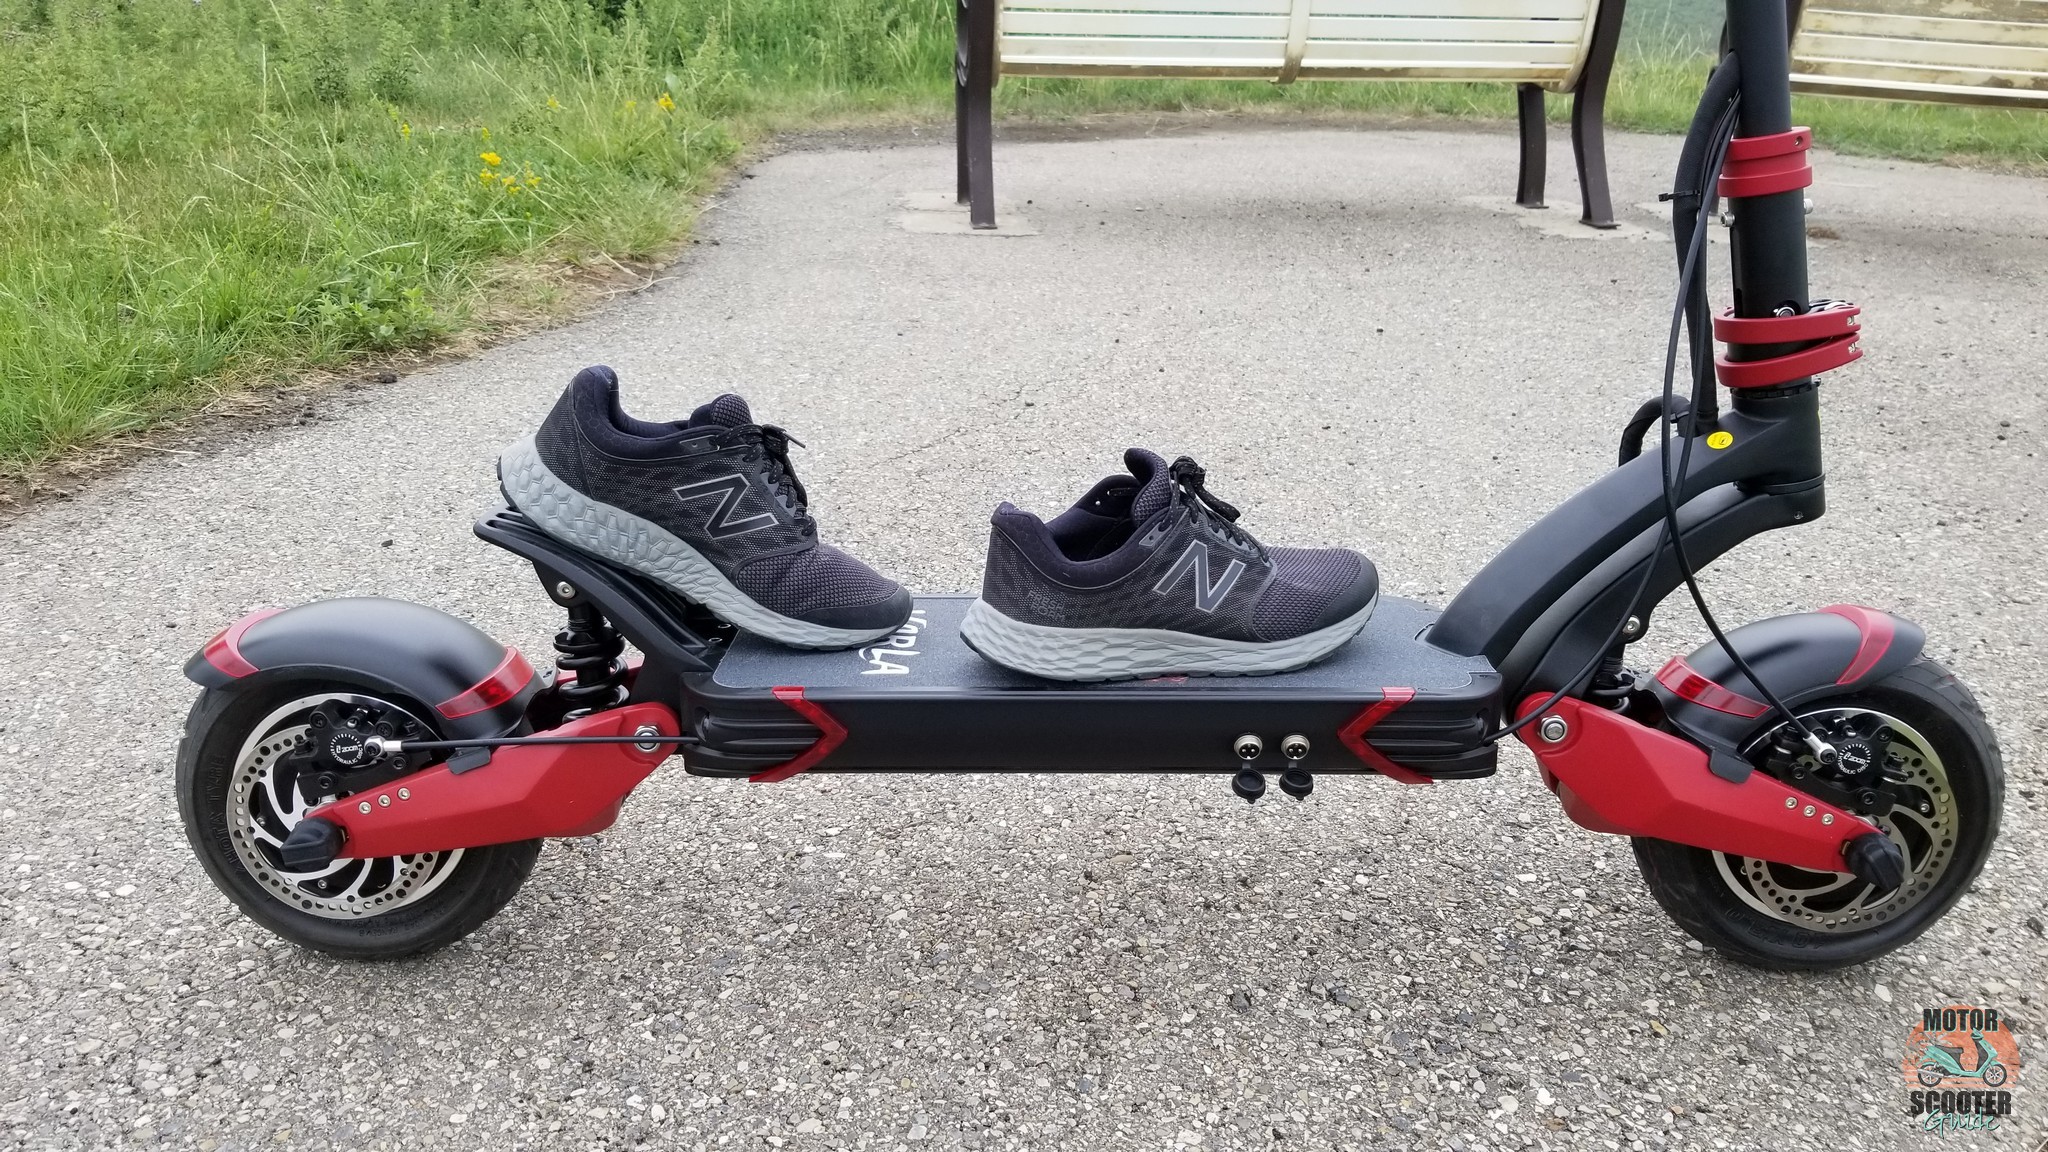 Shoes on the Varla Eagle One scooter simulating riding form